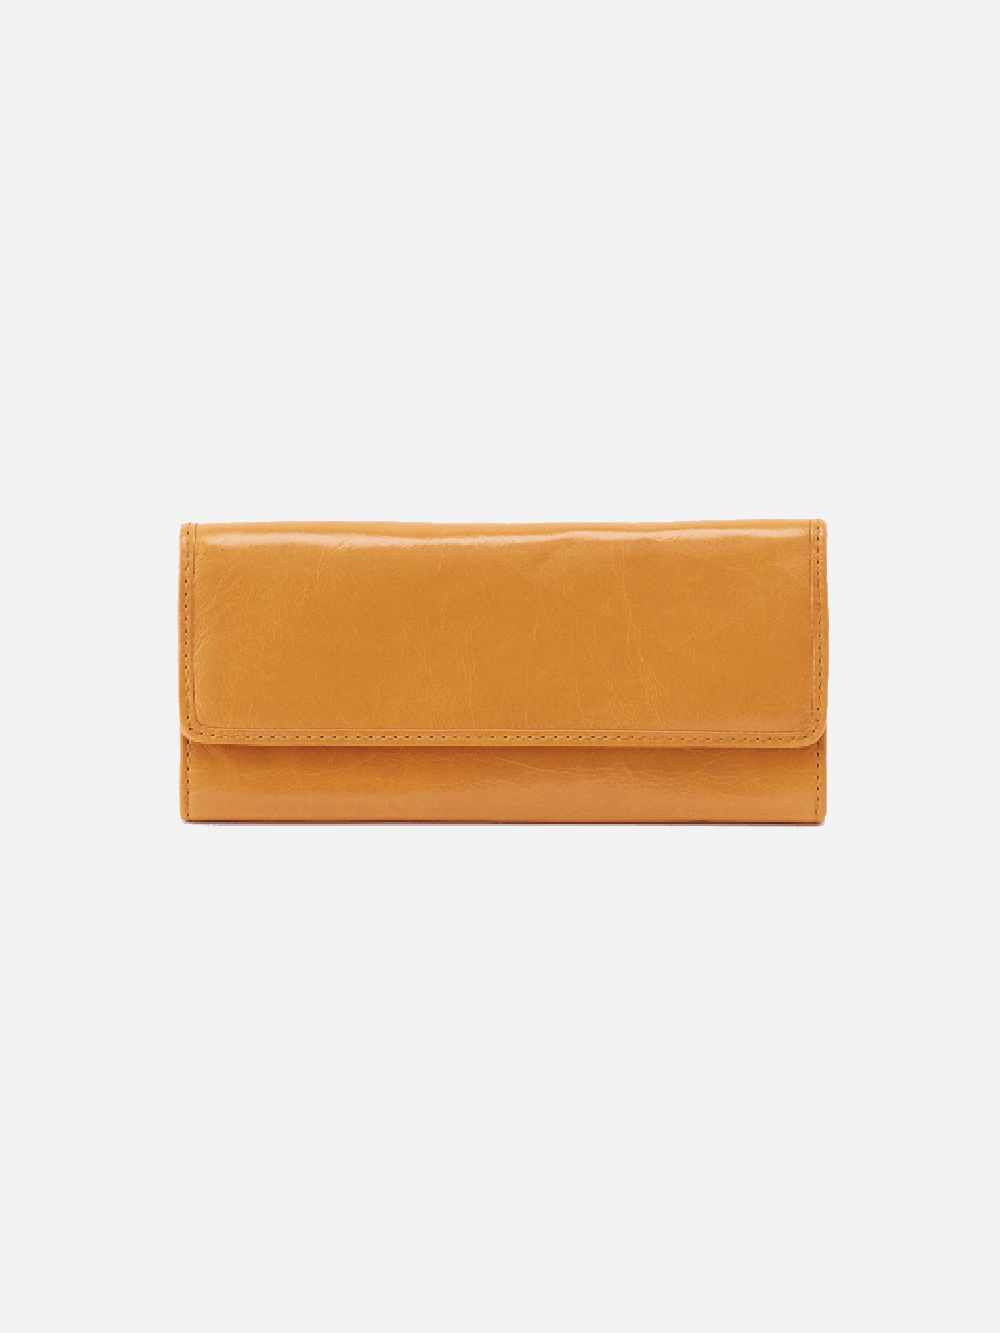 hobo ardor continental trifold wallet in mustard yellow polished leather